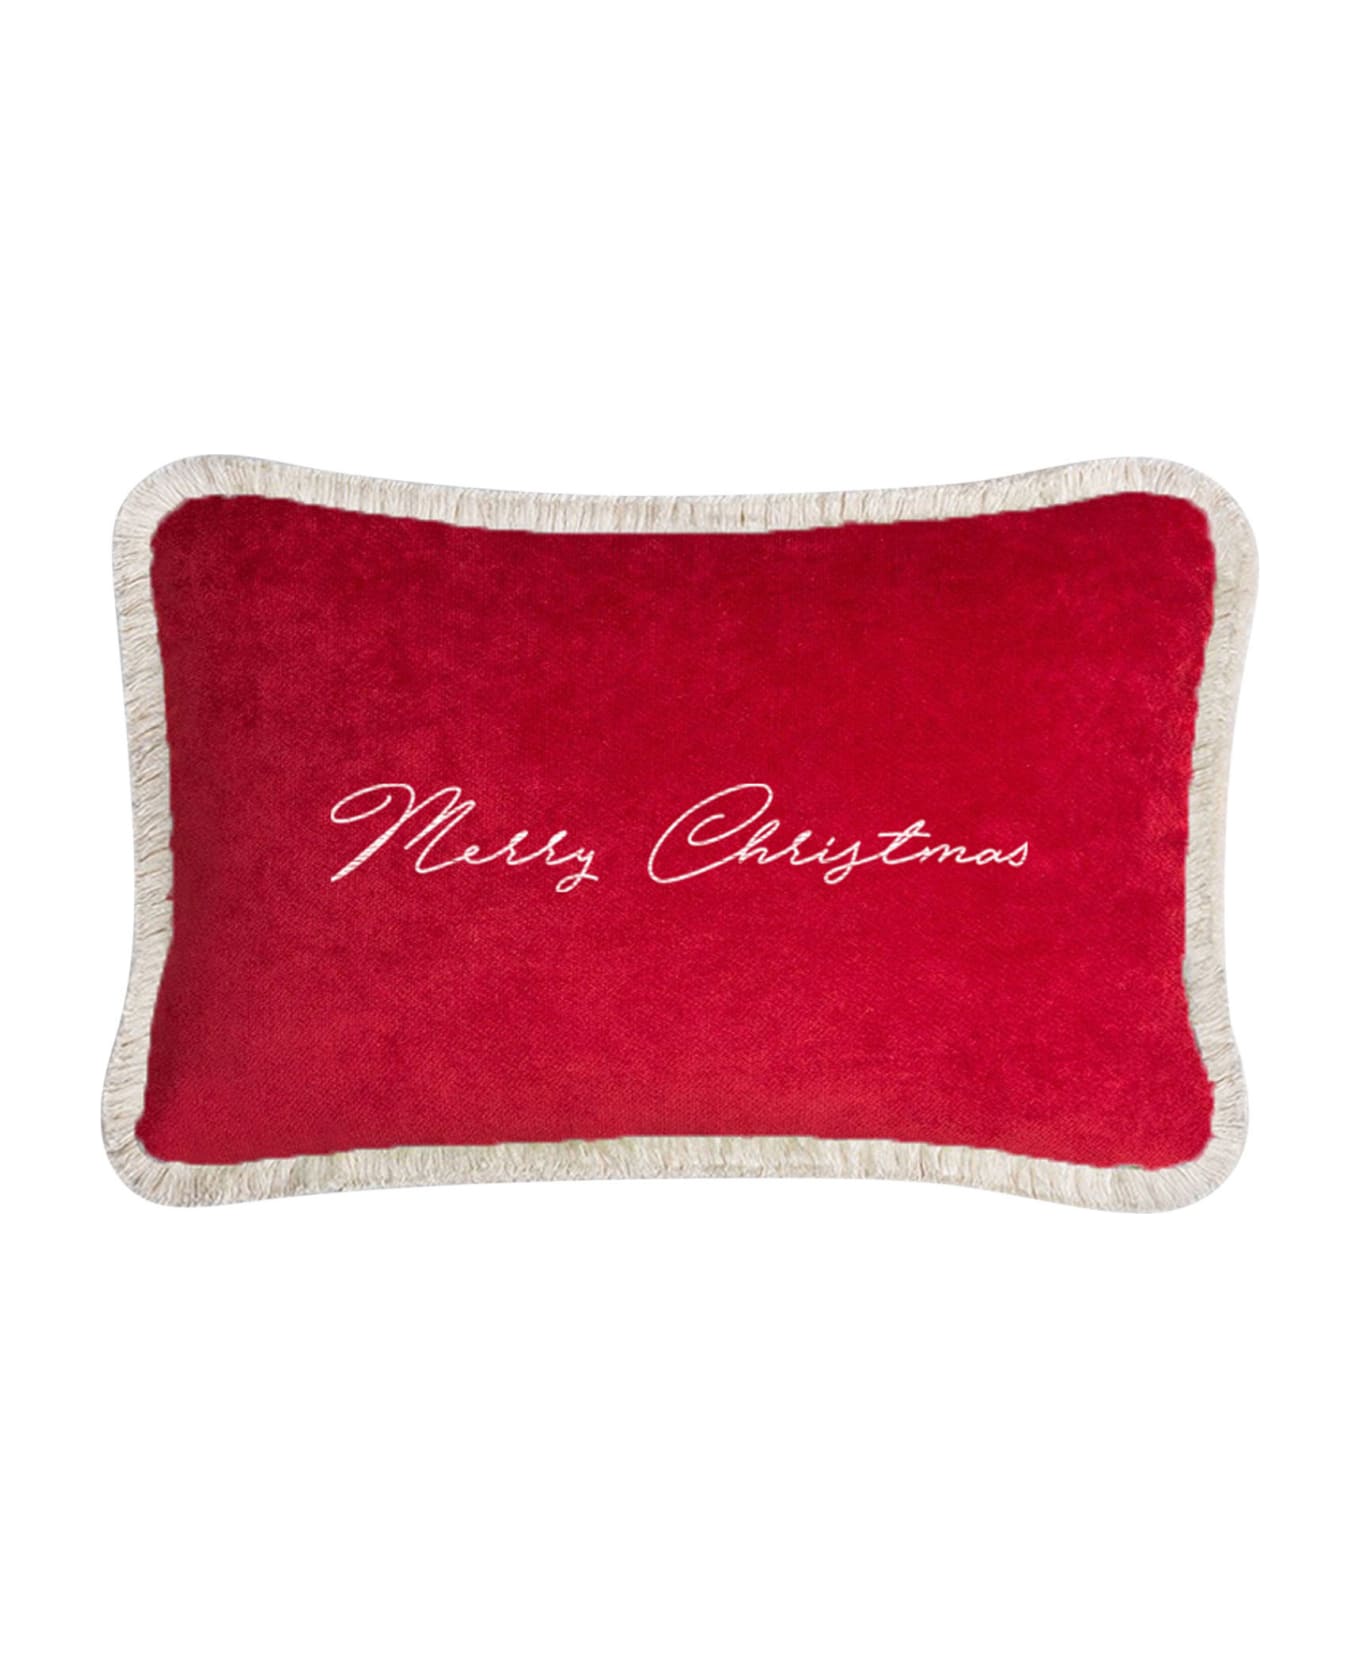 Lo Decor Happy Pillow Merry Christmas - red / white